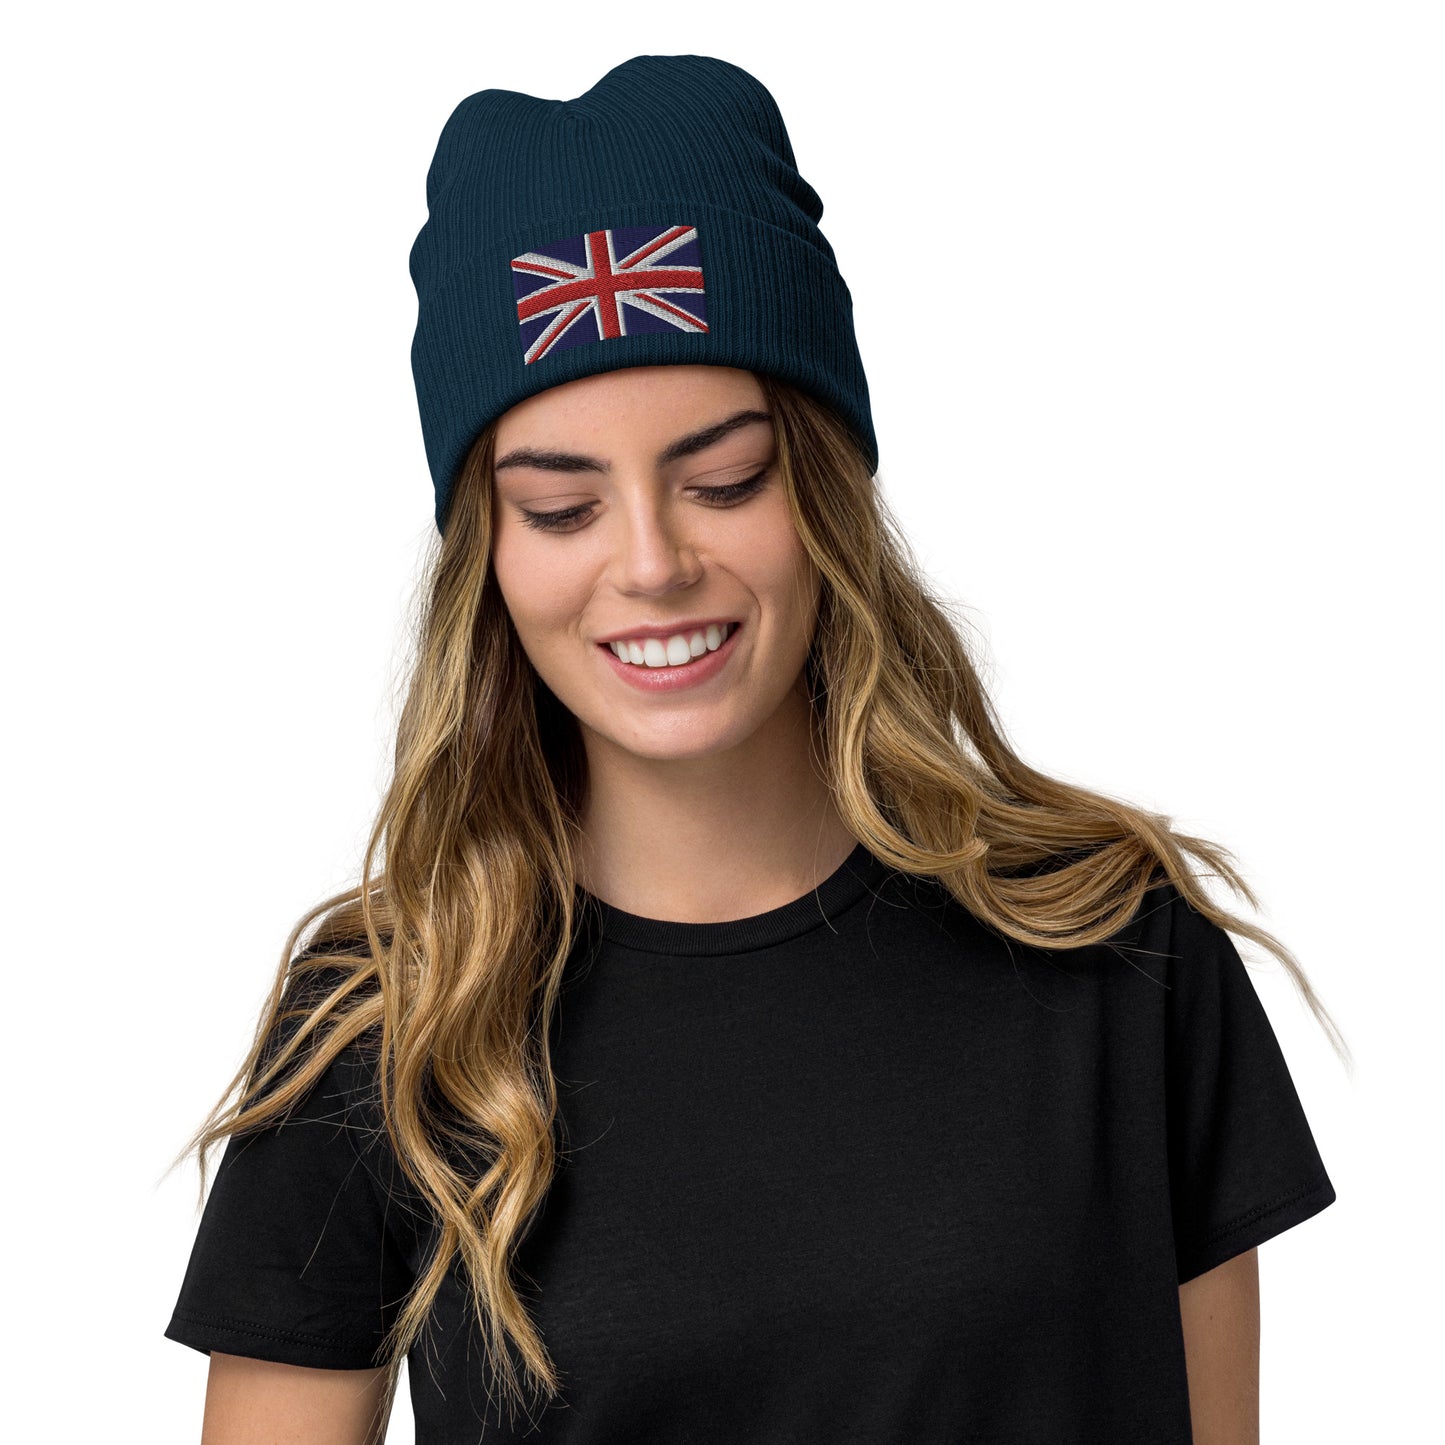 Blue Ribbed Knit Embroidered UK Flag Beanie